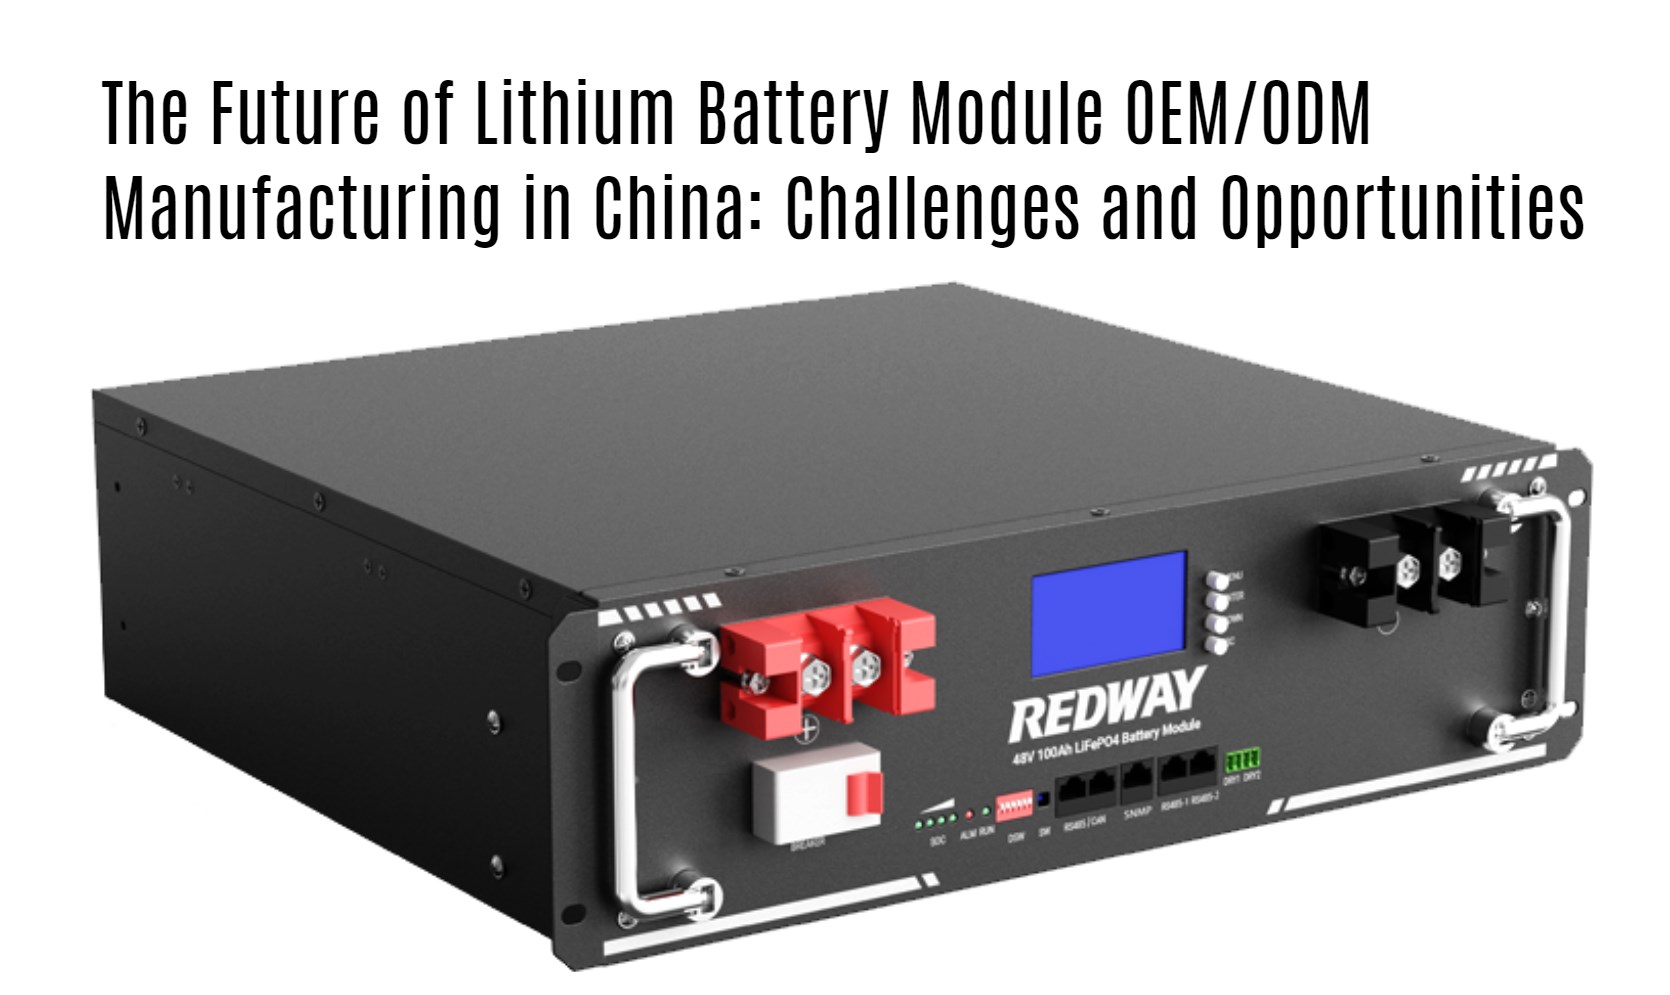 The Future of Lithium Battery Module OEM/ODM Manufacturing in China: Challenges and Opportunities